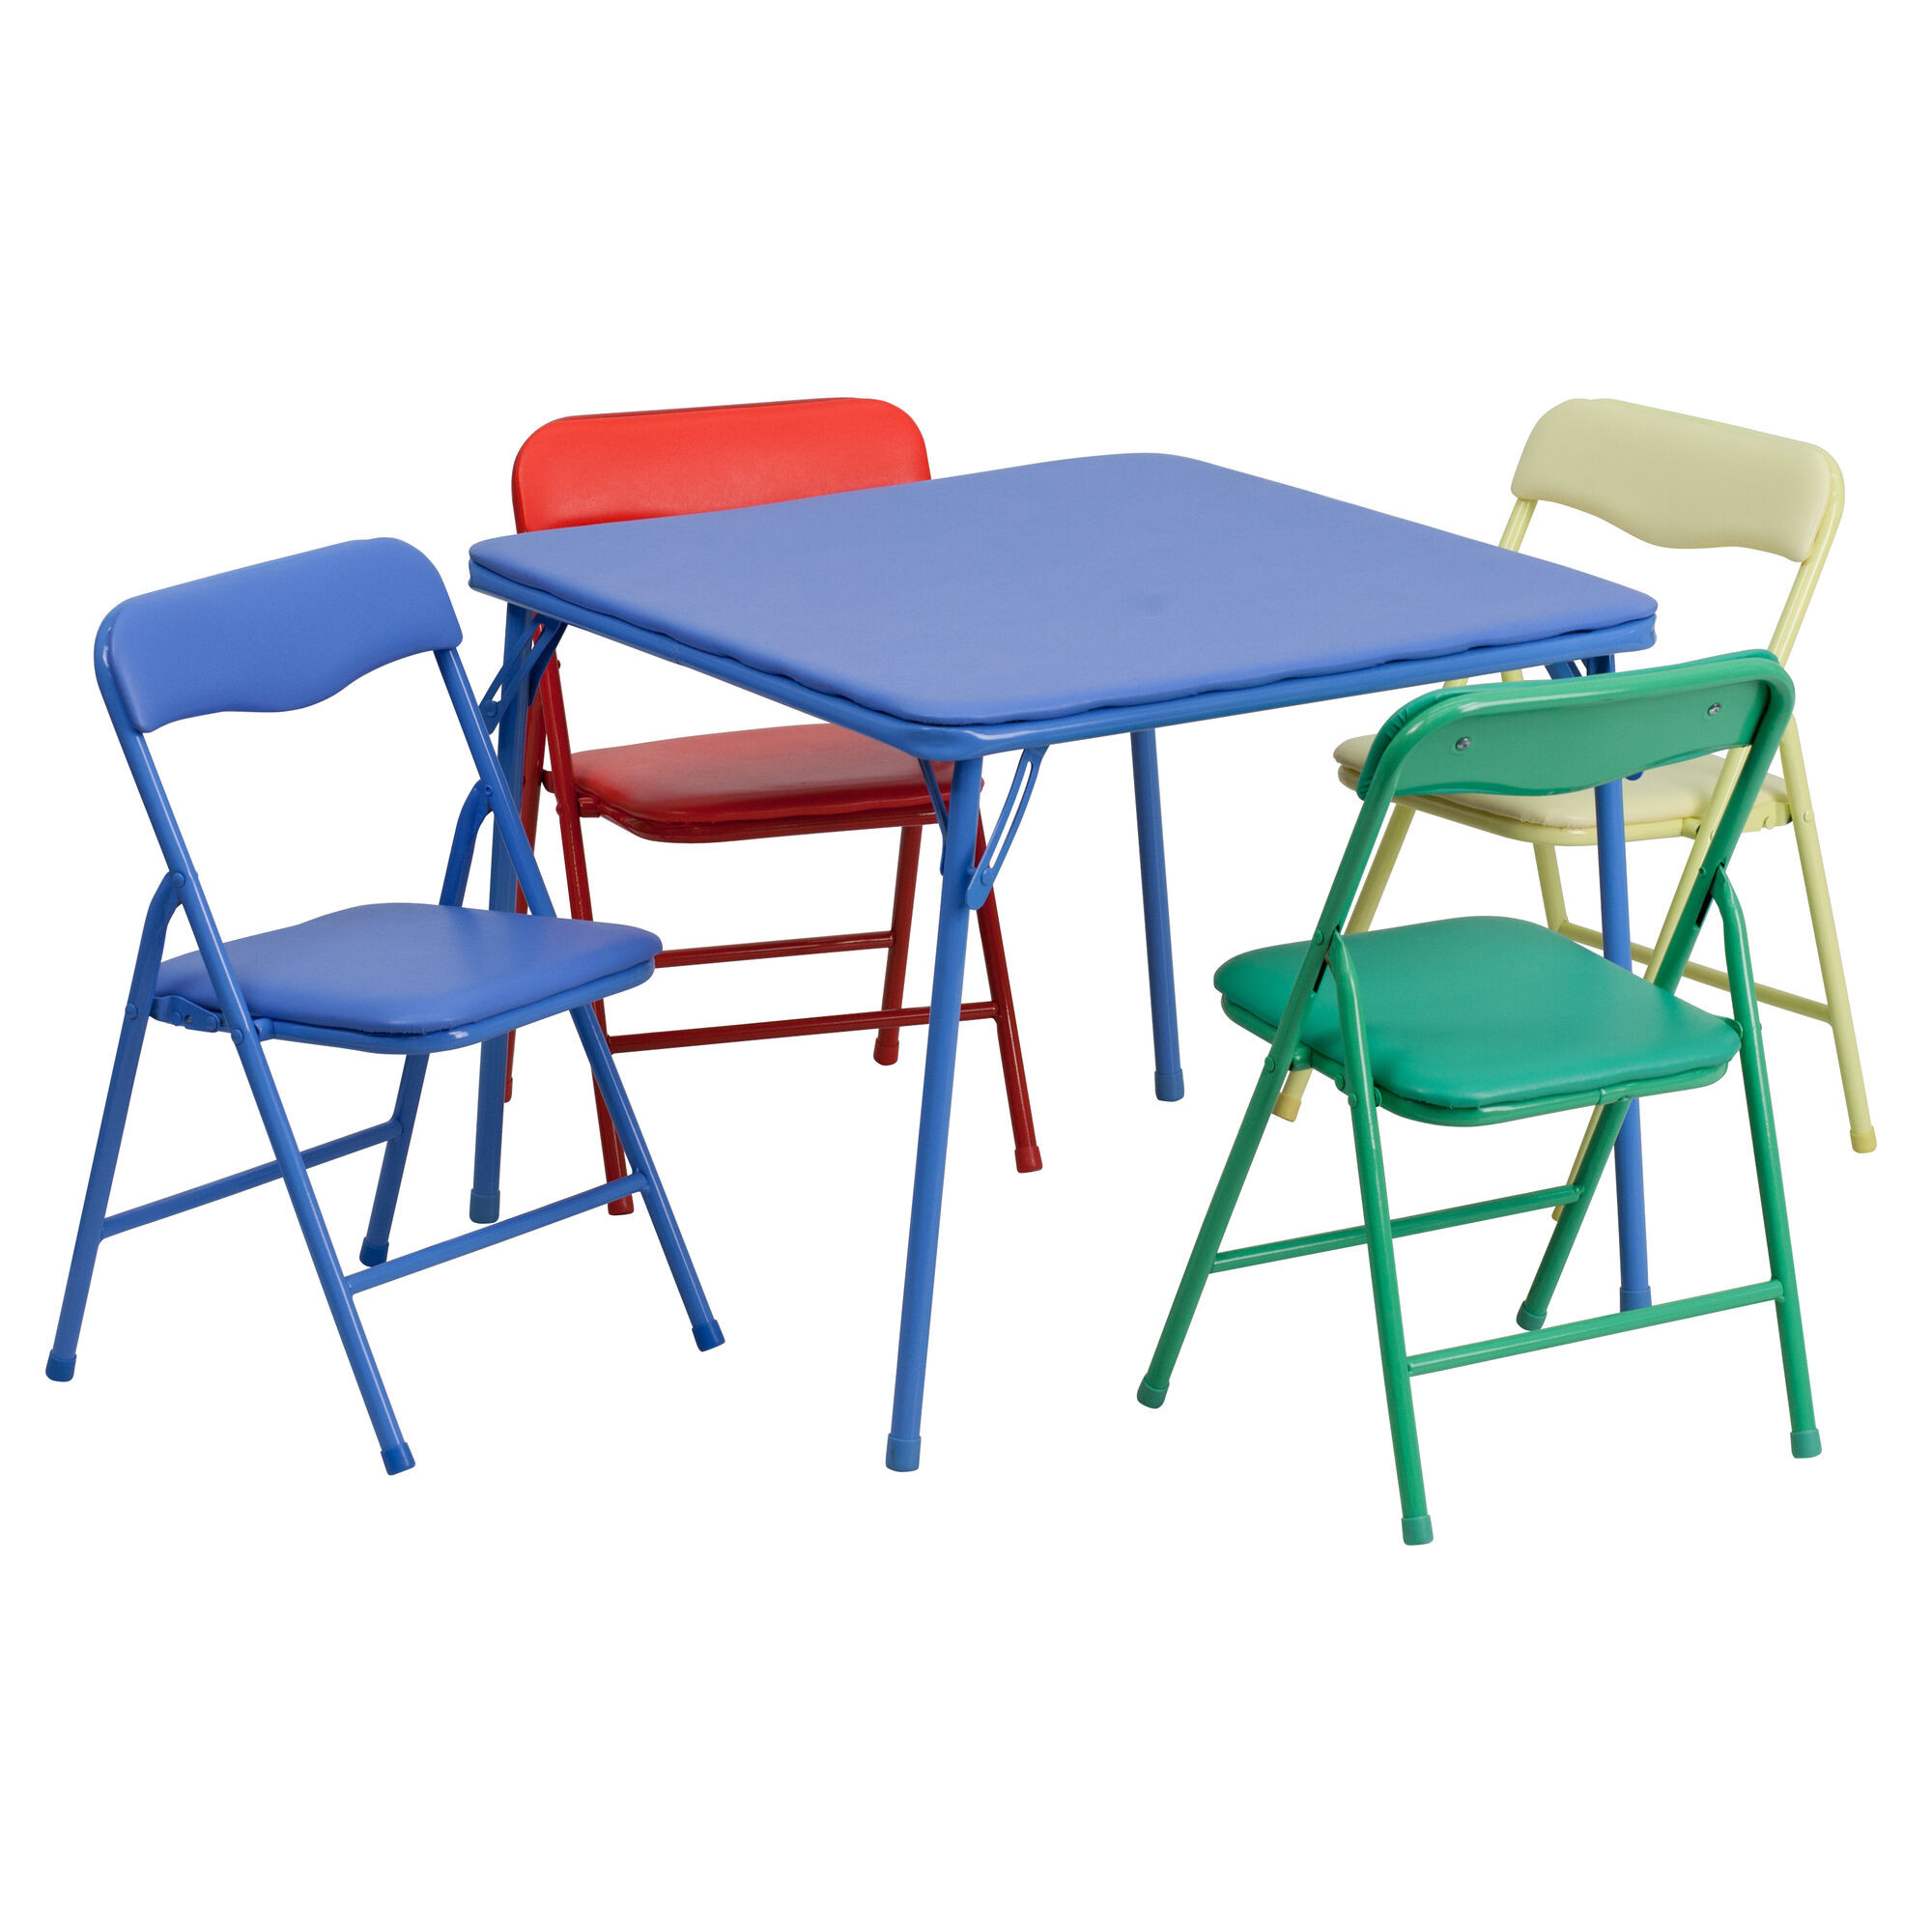 Kids Card Table
 Flash Furniture Kids Colorful 5 Piece Folding Table and